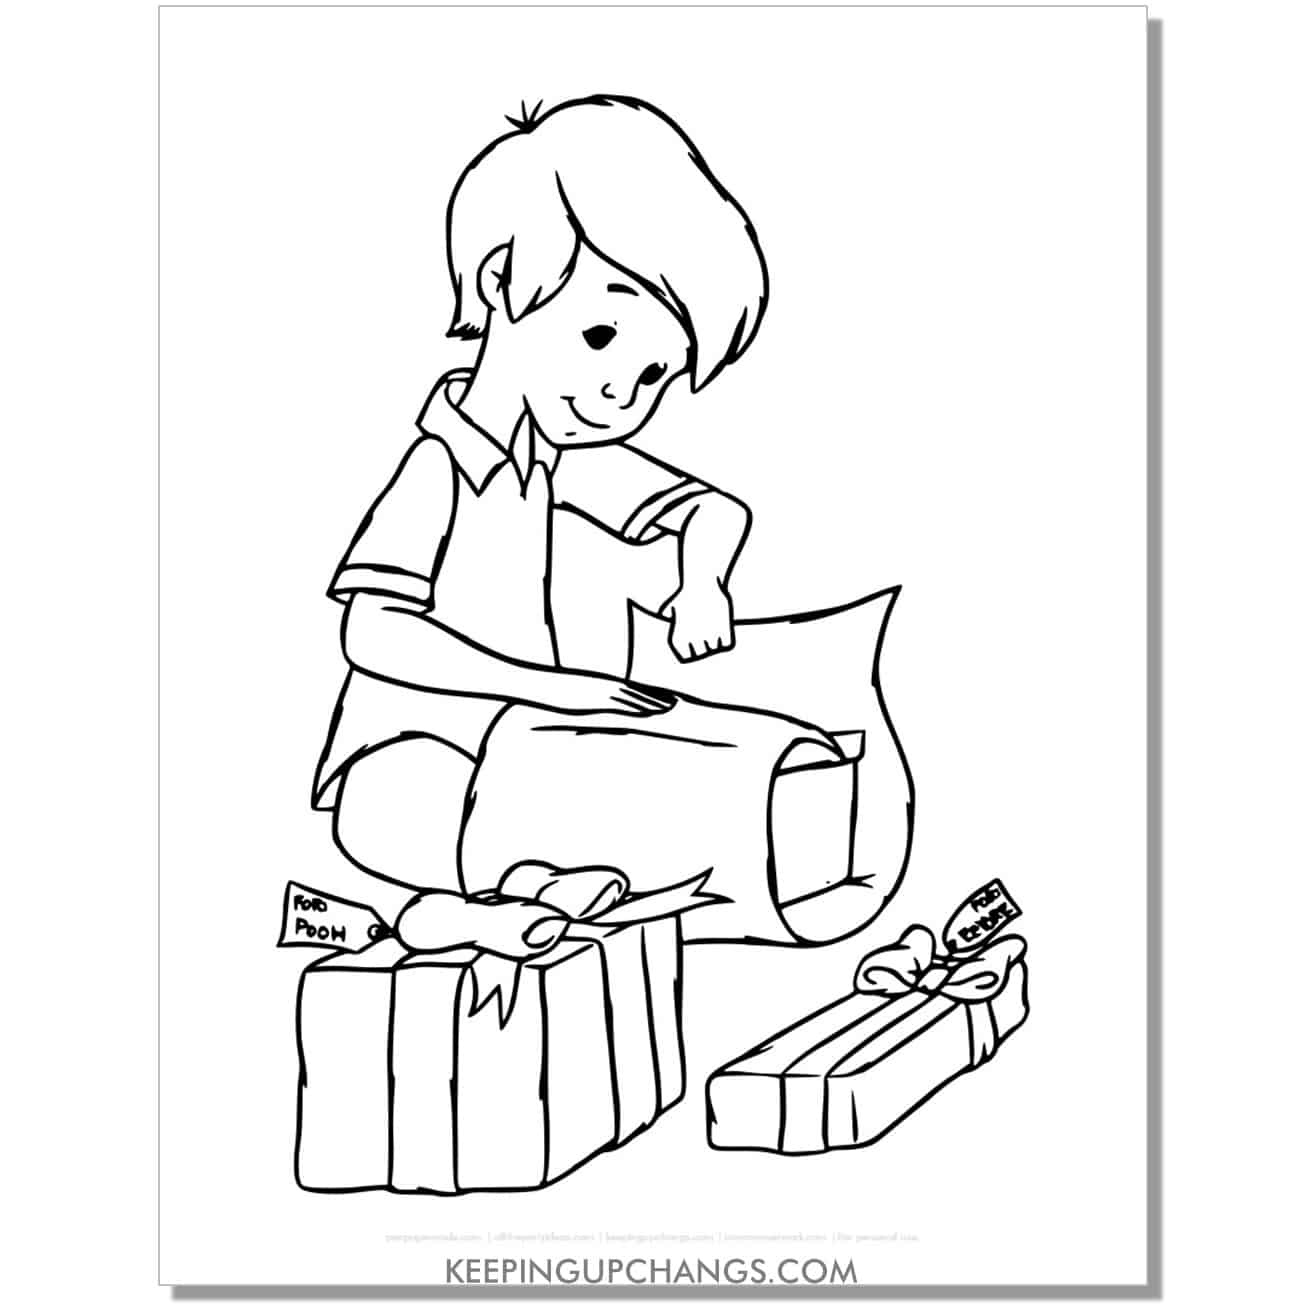 christopher robbin wrapping gifts coloring page.